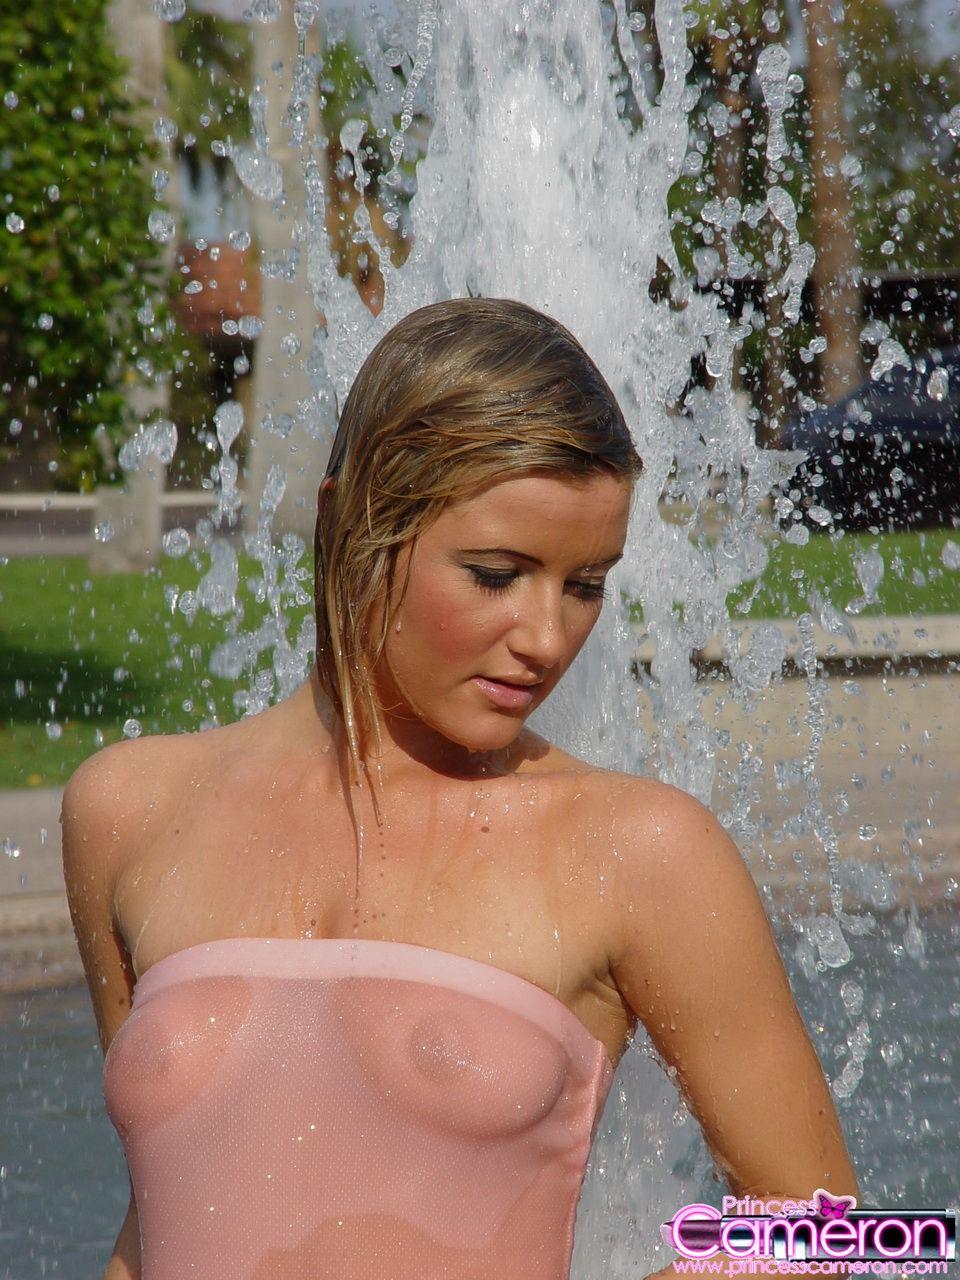 Pictures of teen cutie Princess Cameron getting all wet for you #59838467